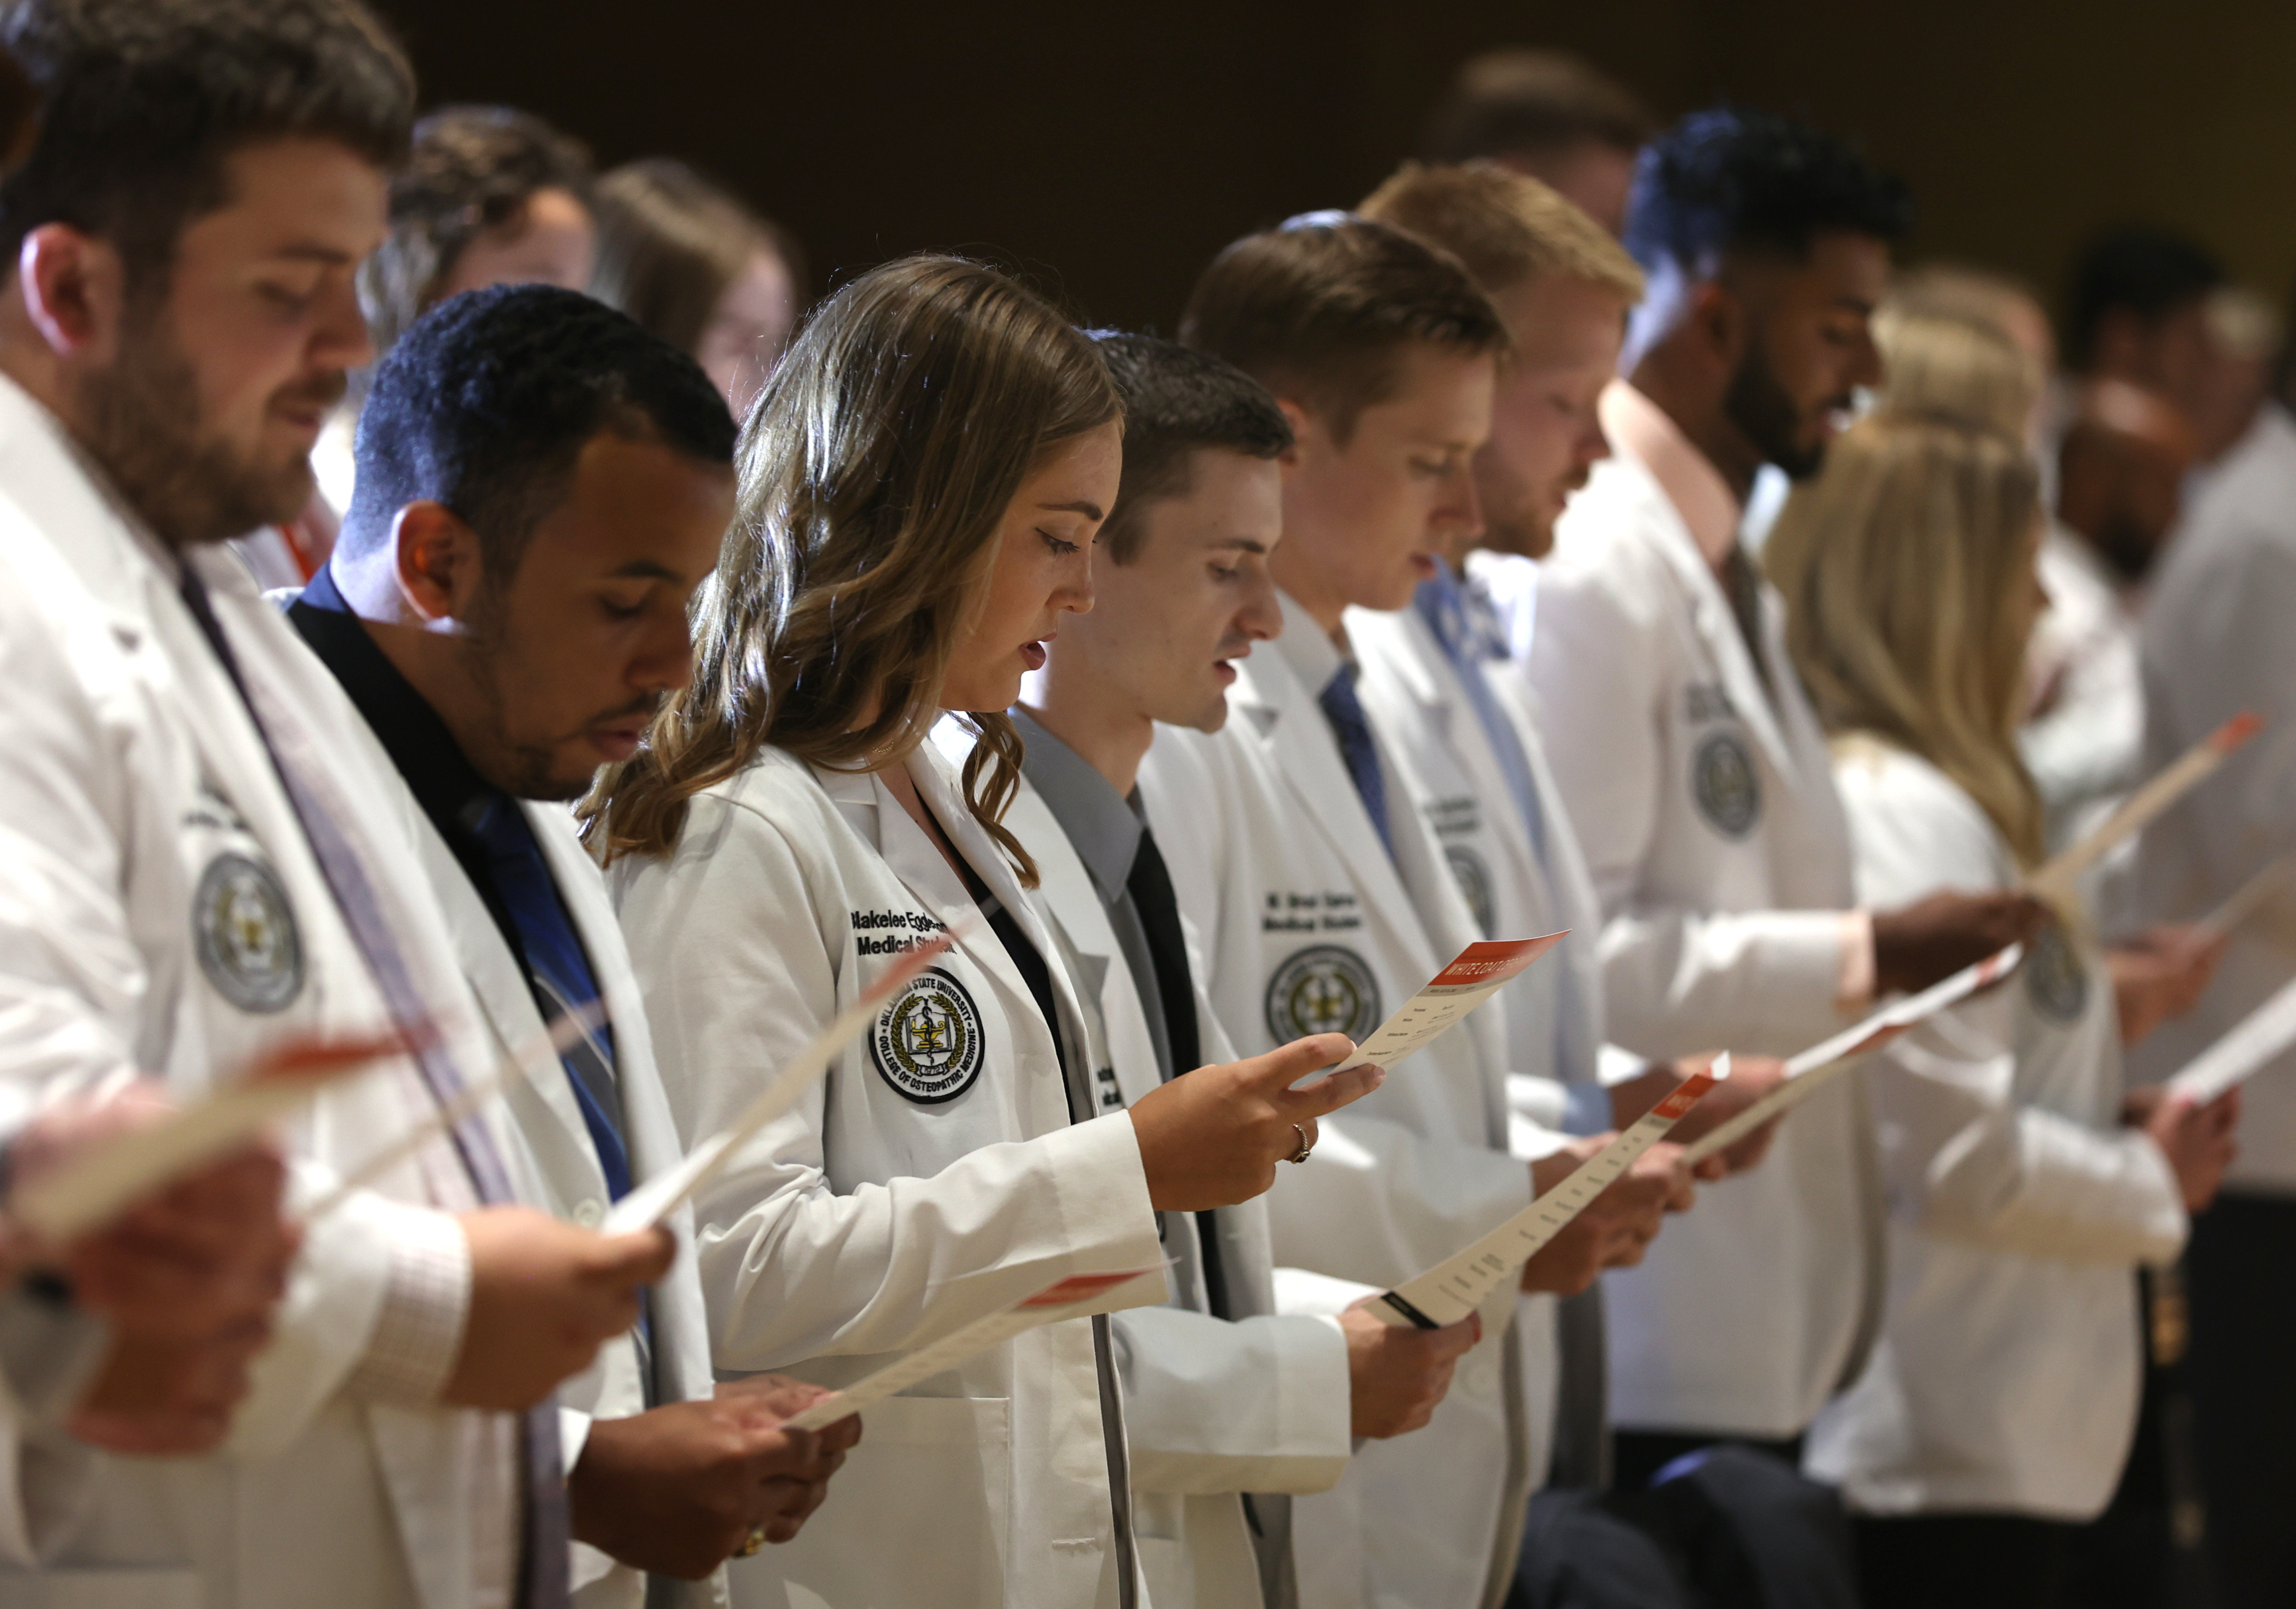 Students in white coats at Oklahoma State University College of Osteopathic Medicine reading from a pamphlet